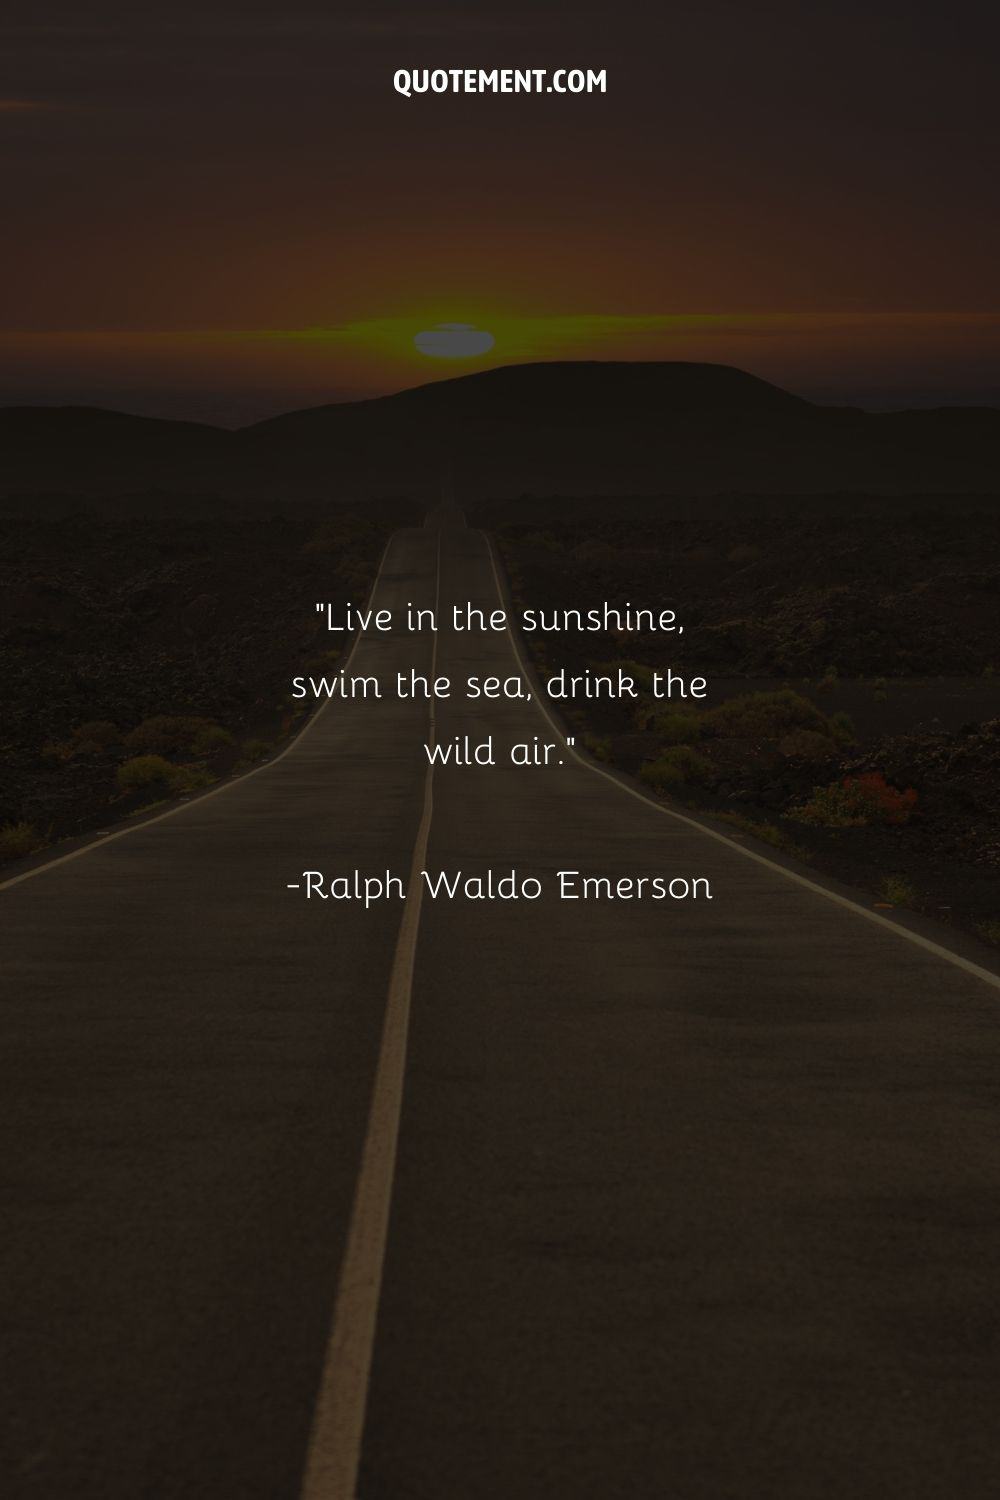 Road disappearing into the radiant sunset representing a sweet life quote
